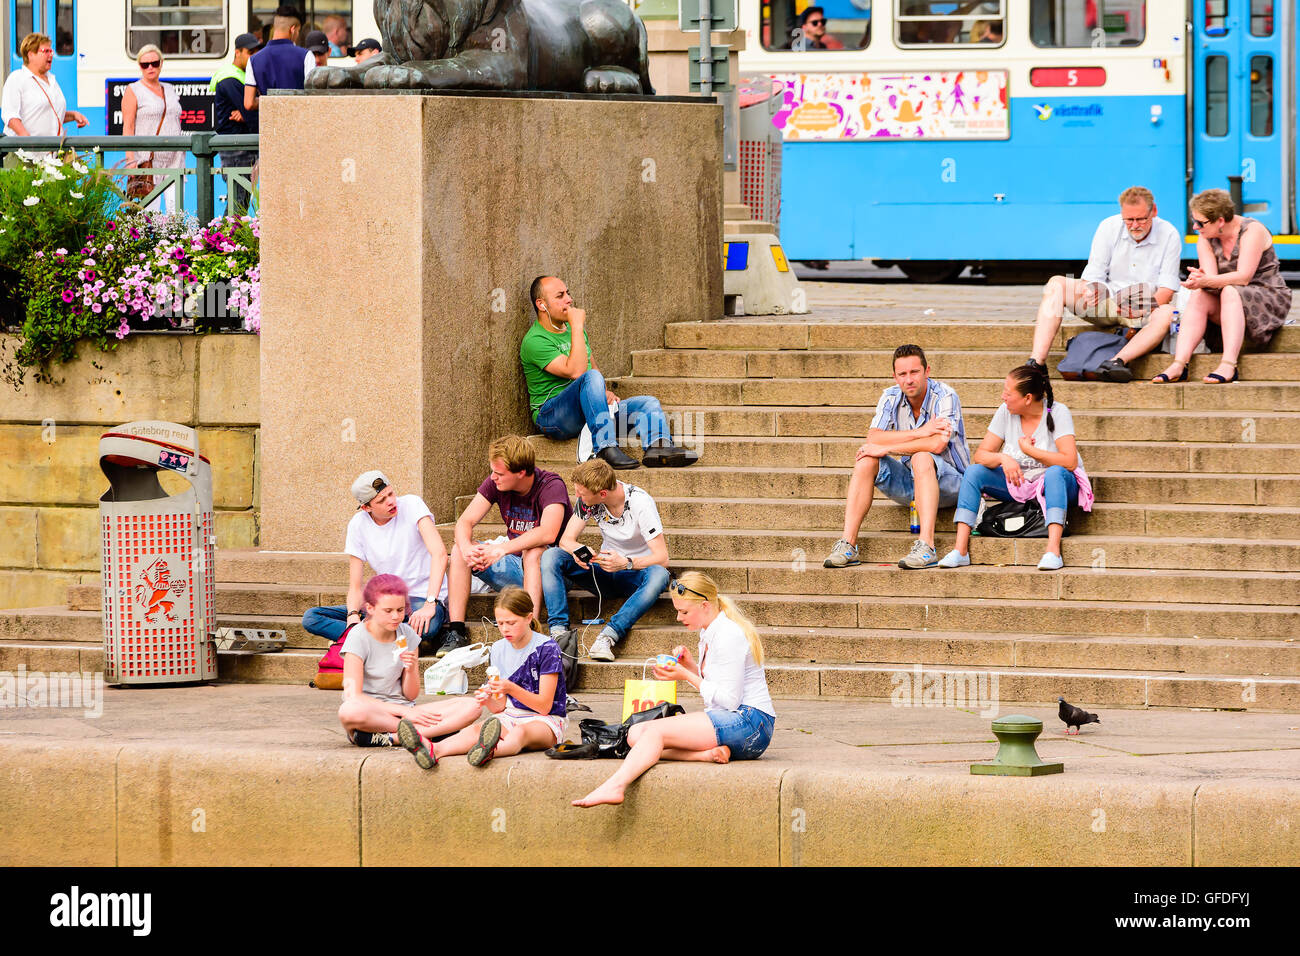 Goteborg, Sweden - July 25, 2016: Real people in everyday life. Groups of people sitting on stone stairs enjoying the day while Stock Photo